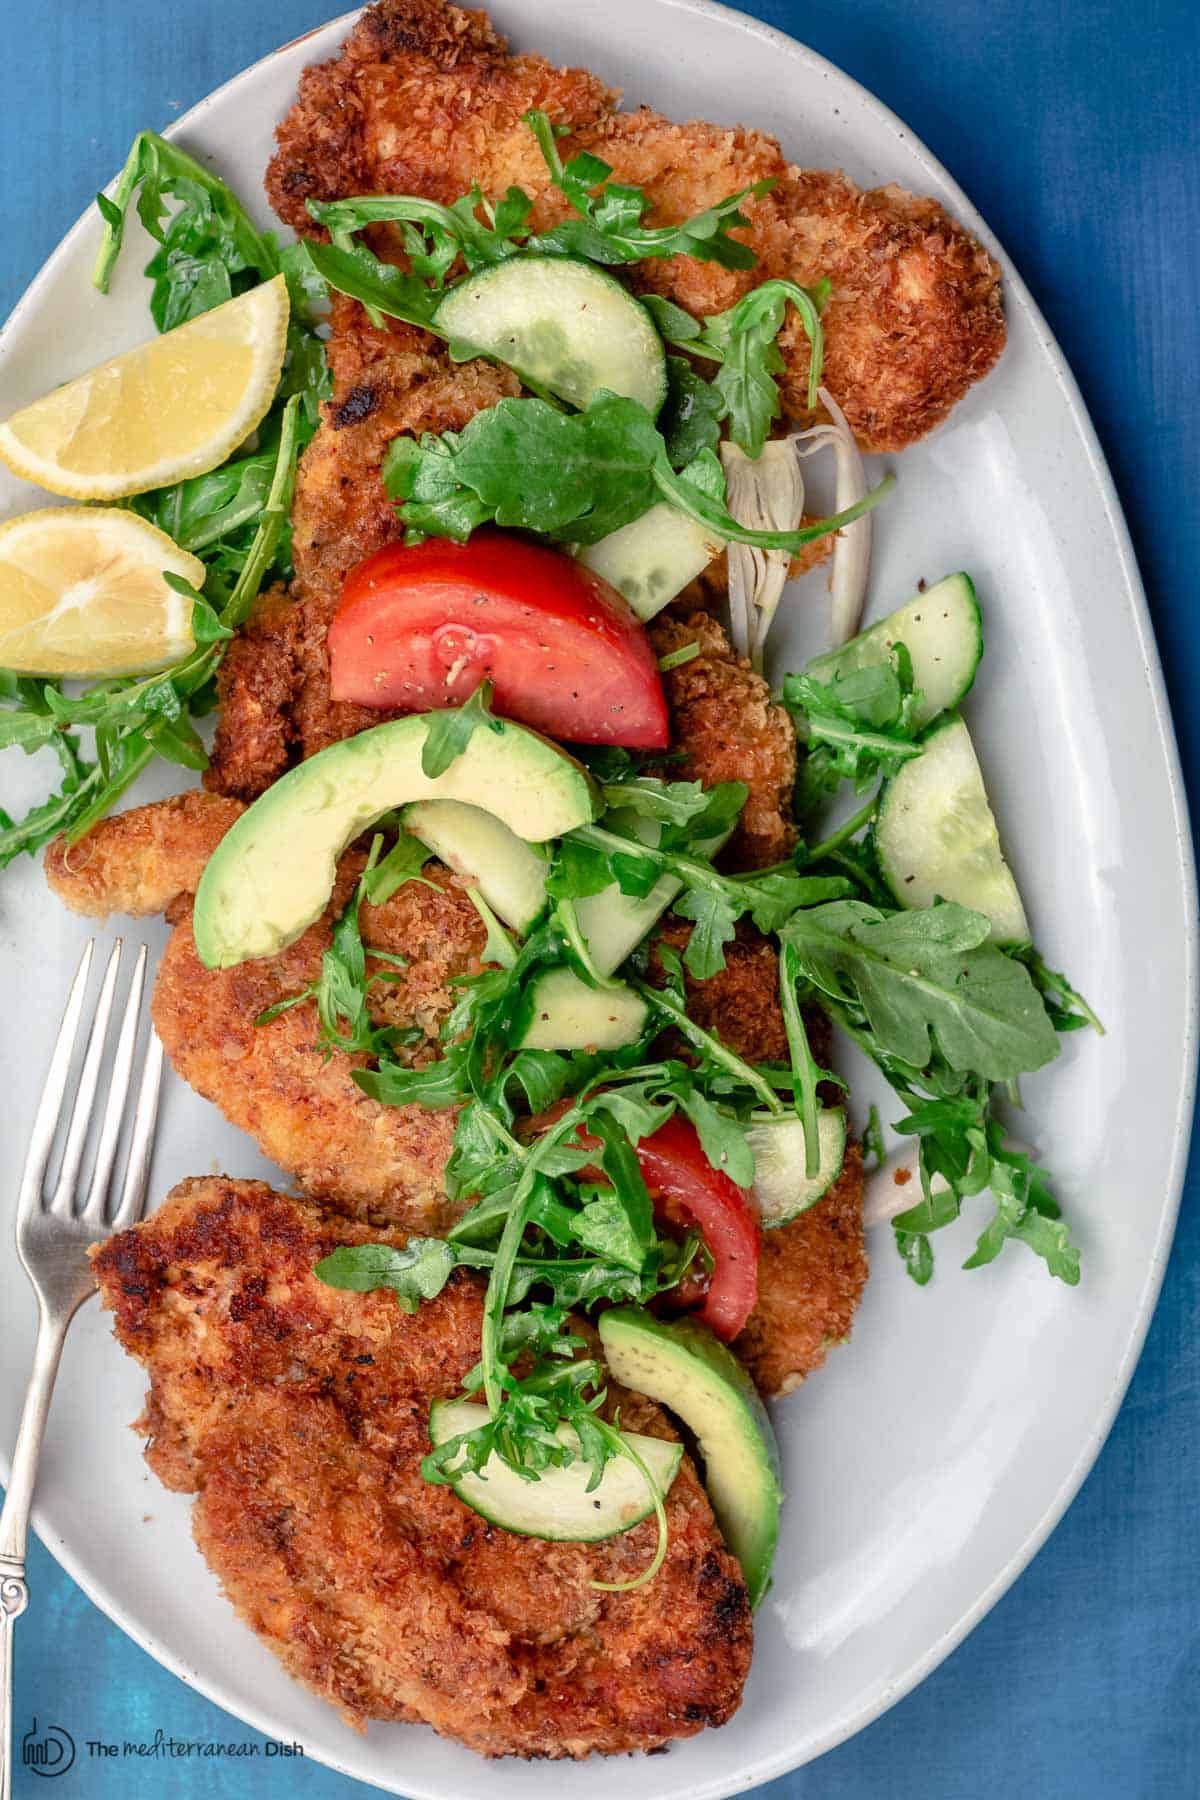 Best Crispy Oven Baked Chicken Cutlets - Easy Recipe - Pinch Me Good